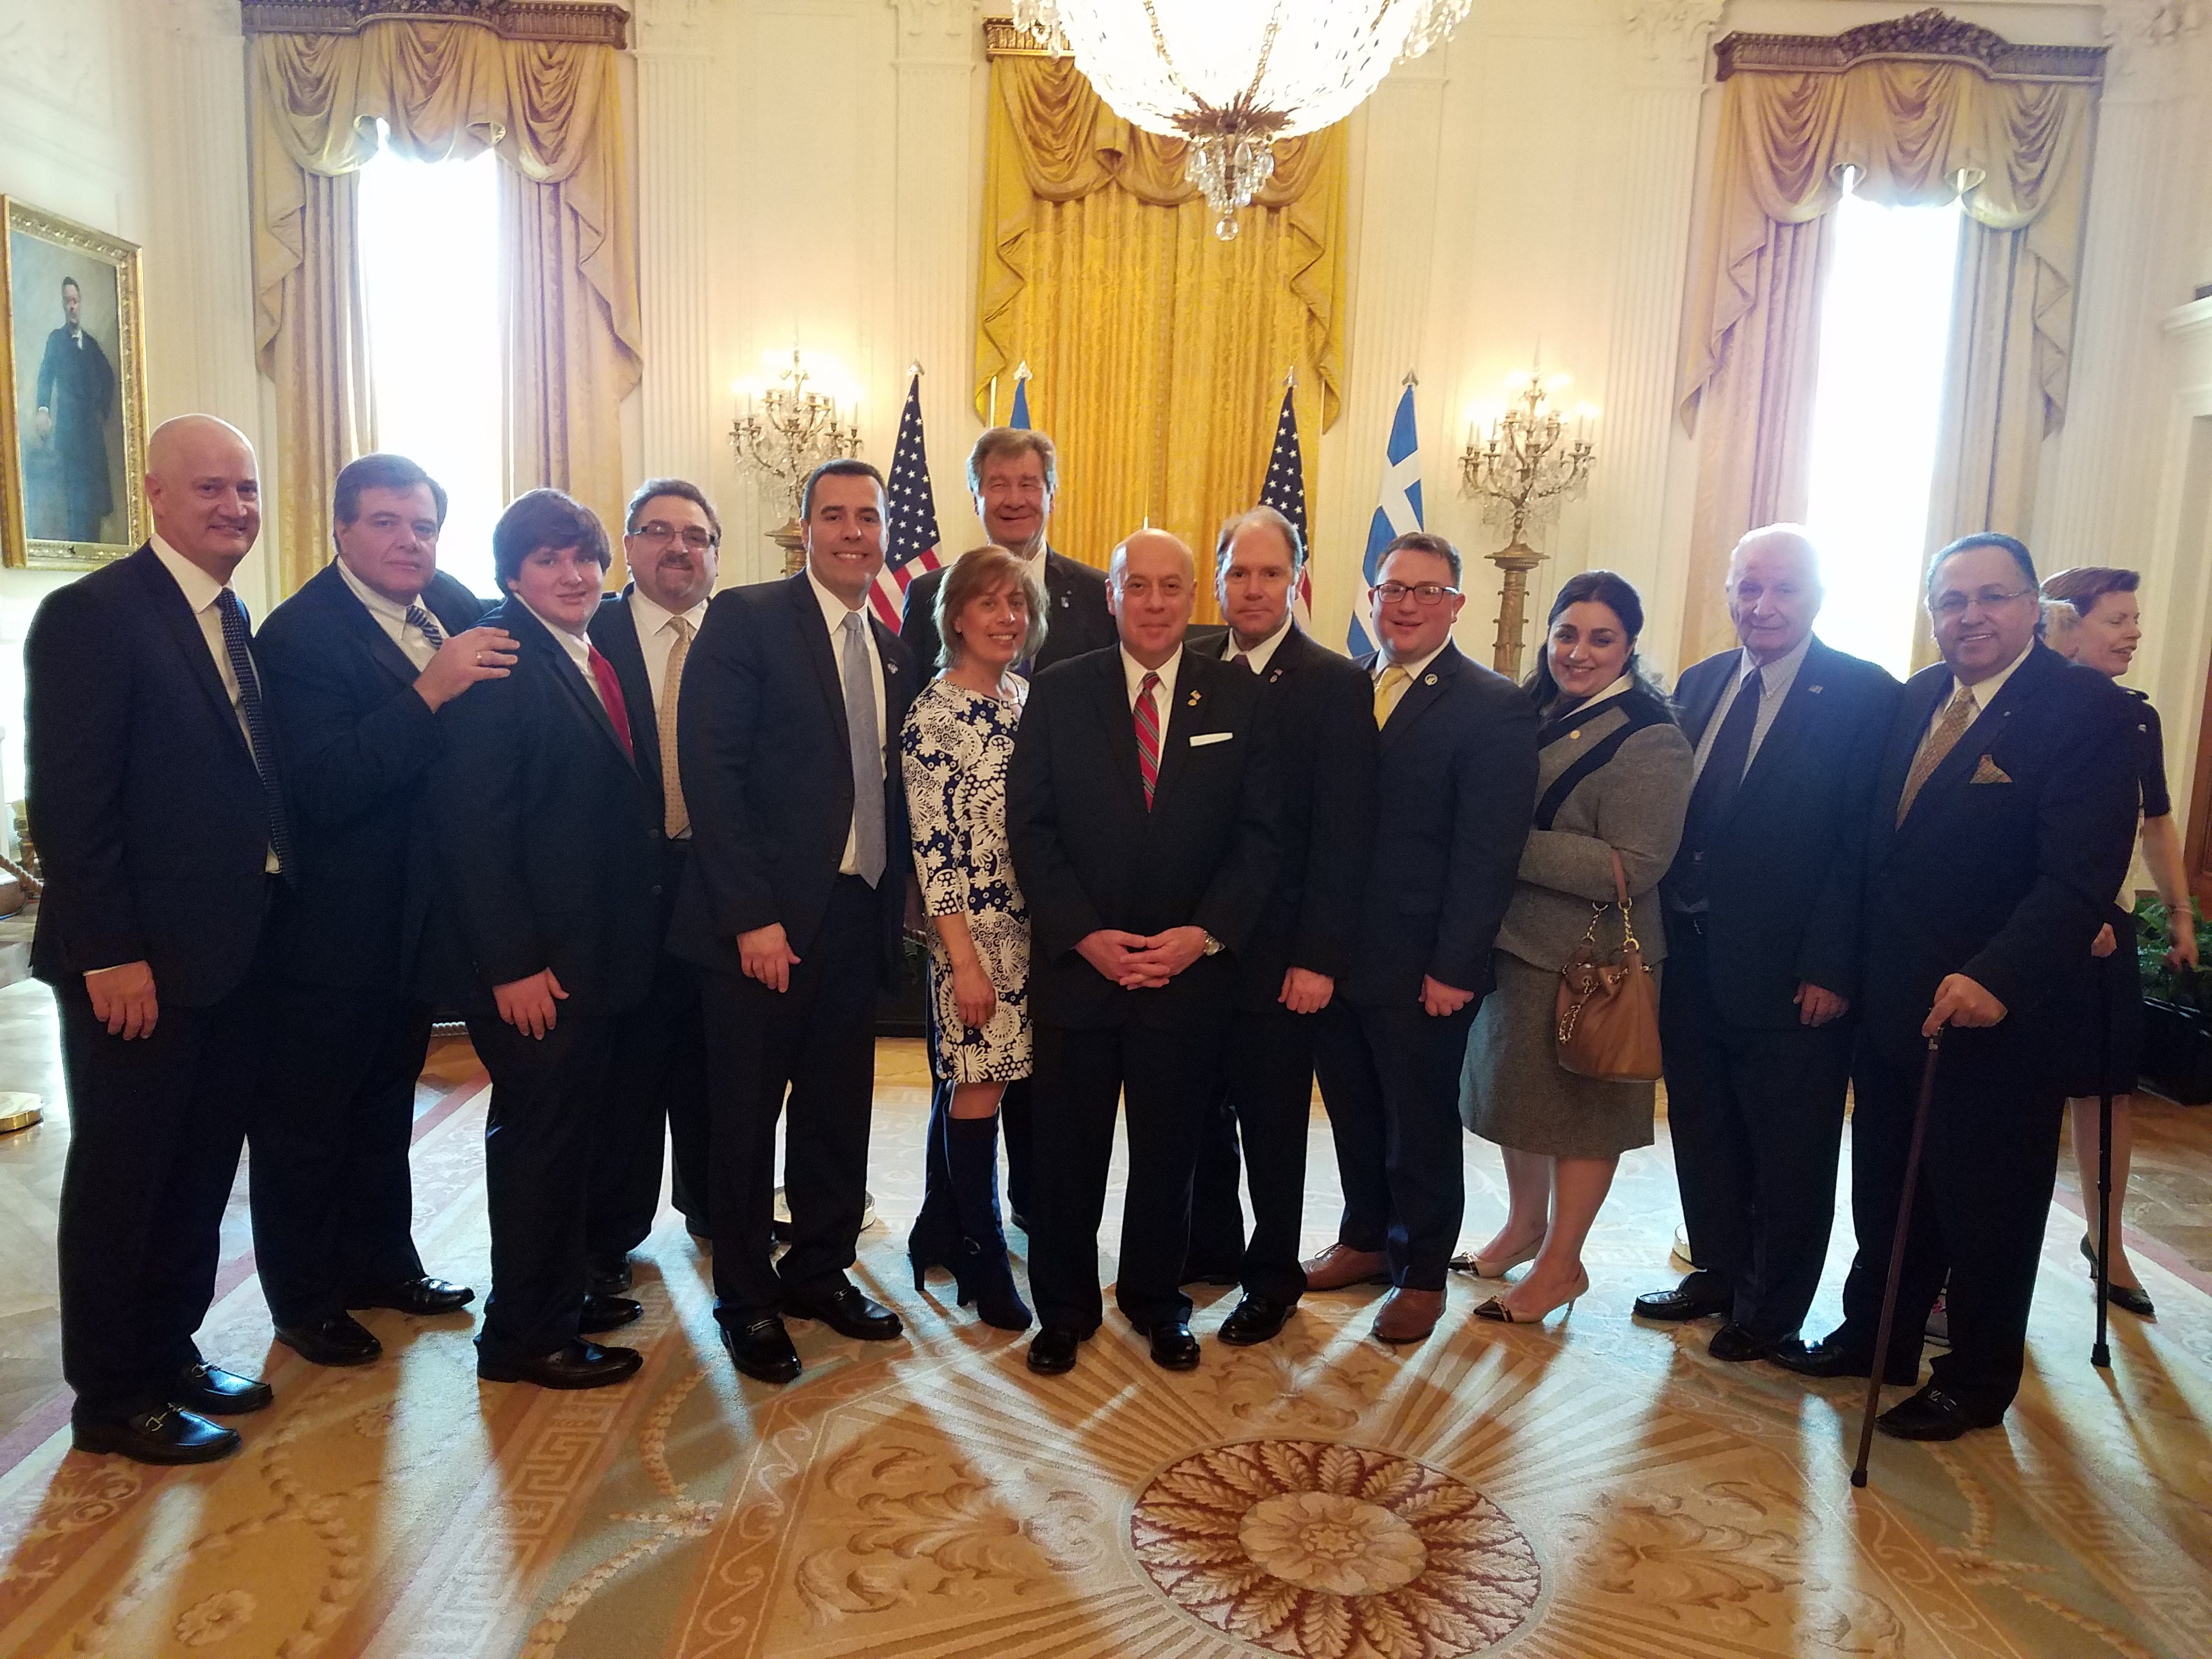 AHEPA Family Celebrates Greek Independence Day at White House